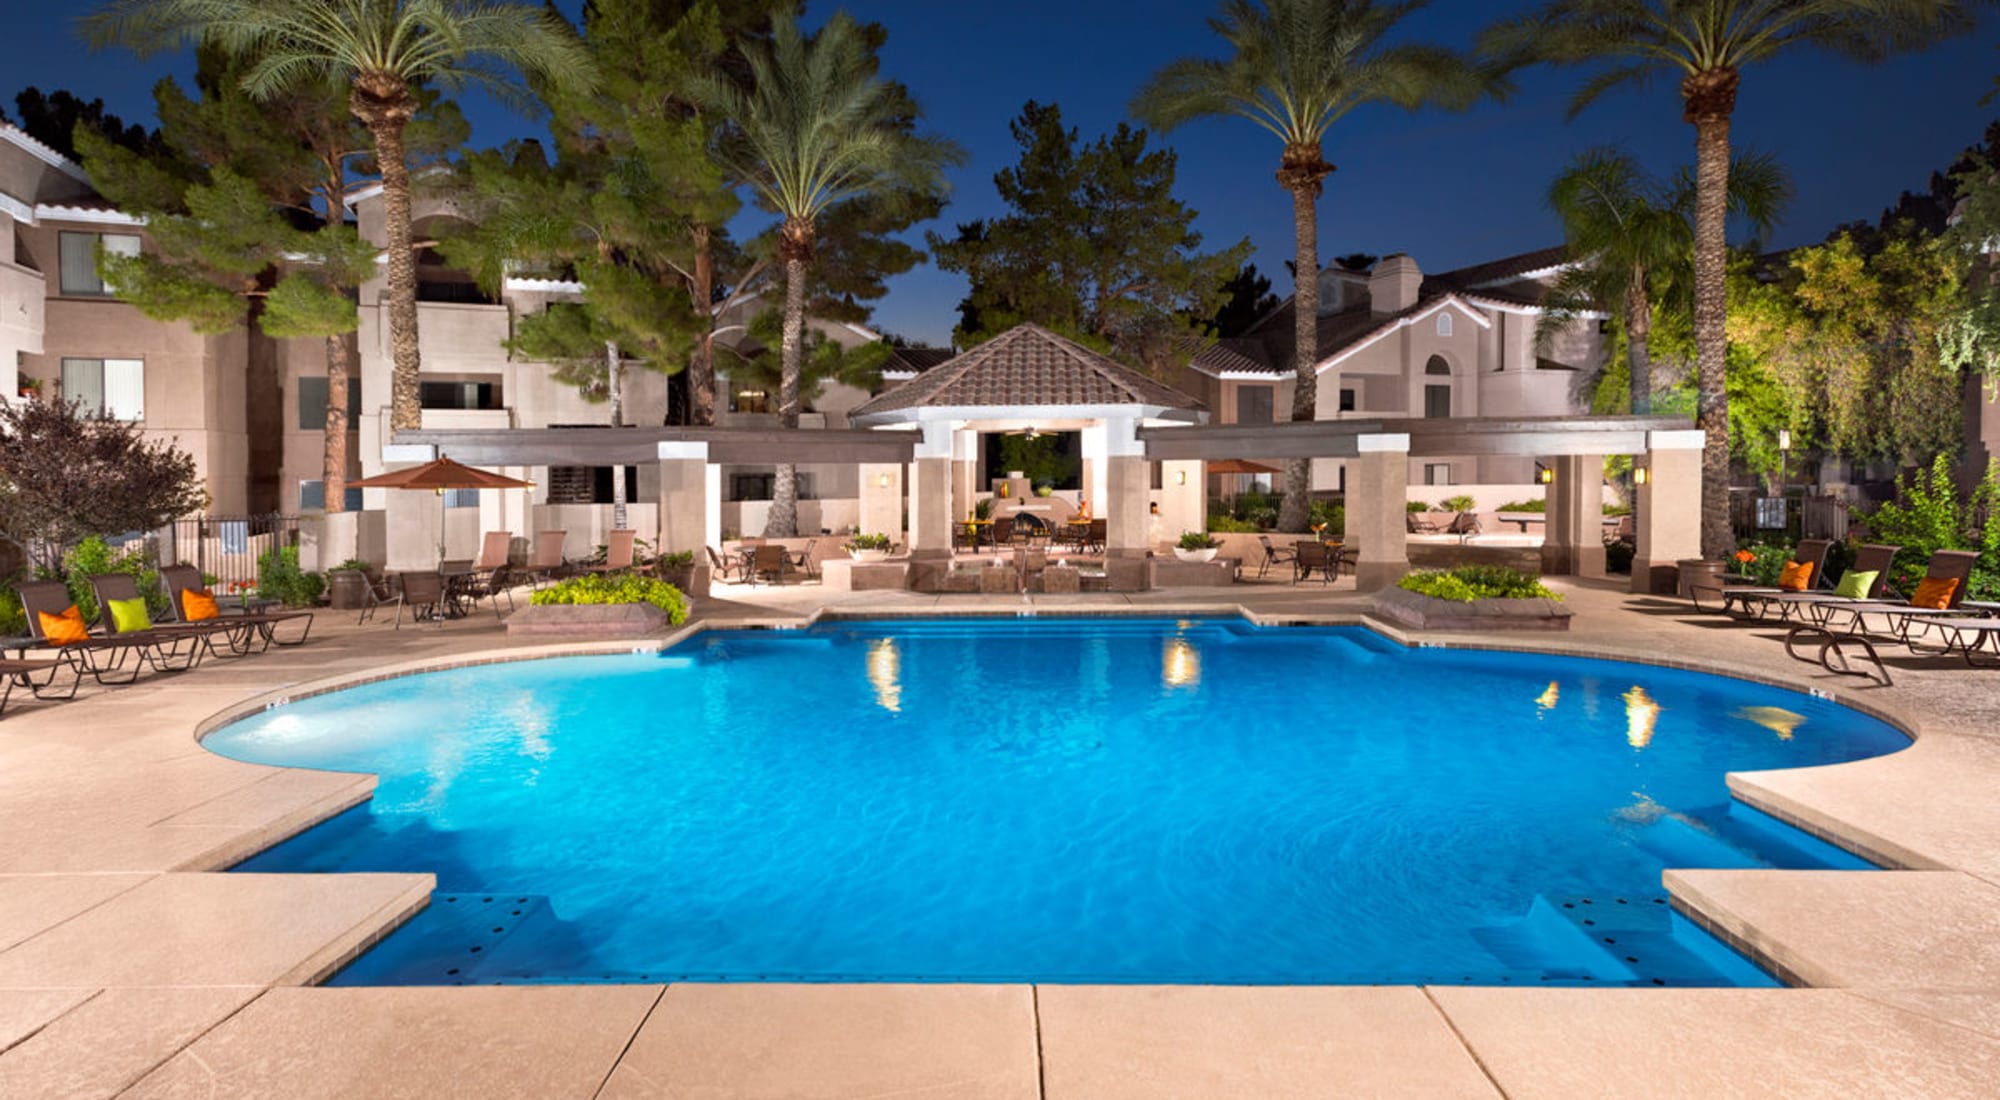 Swimming pool at The Palisades in Paradise Valley 